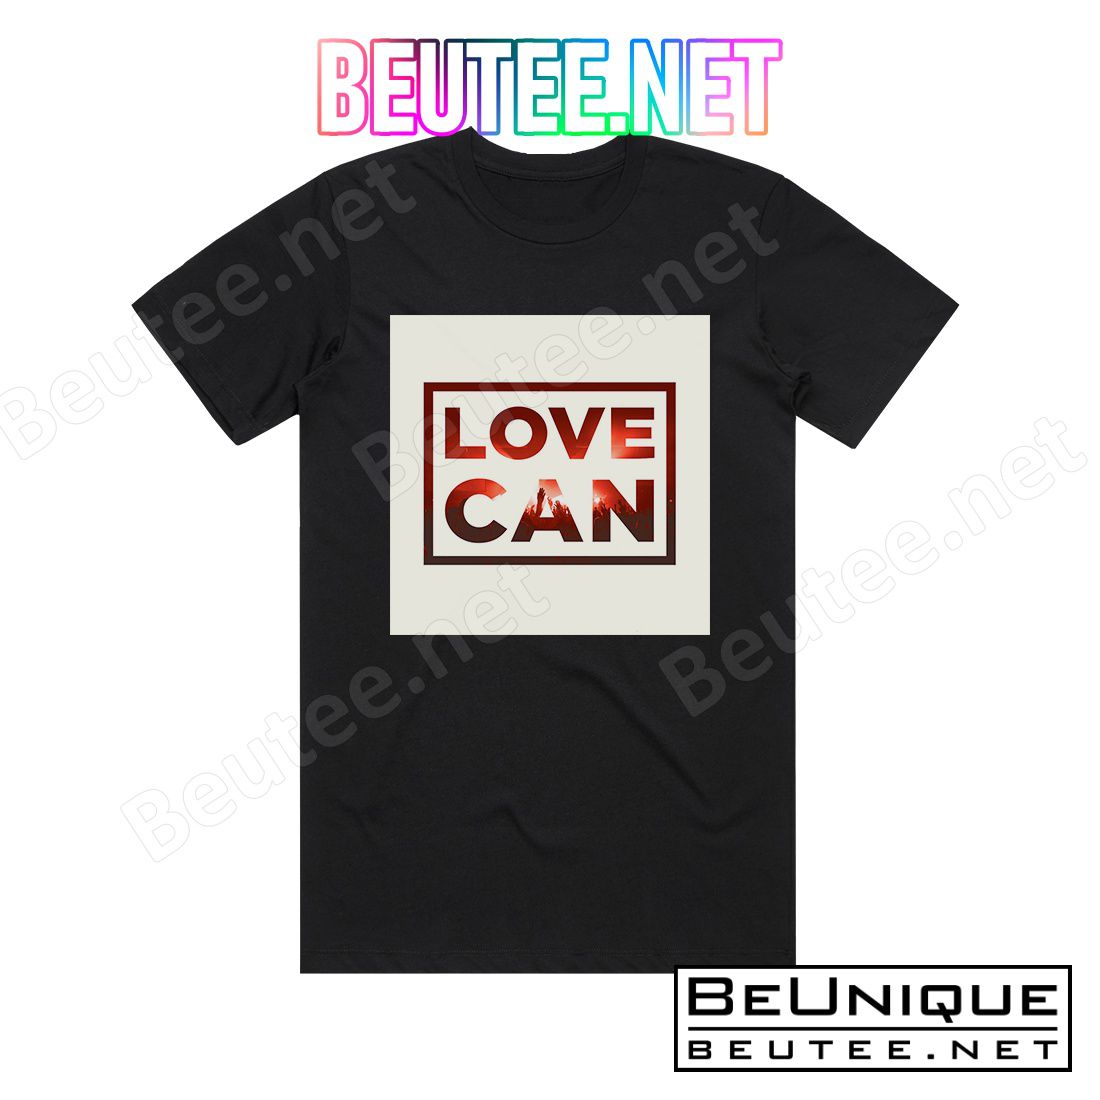 Central Live Love Can Album Cover T-Shirt